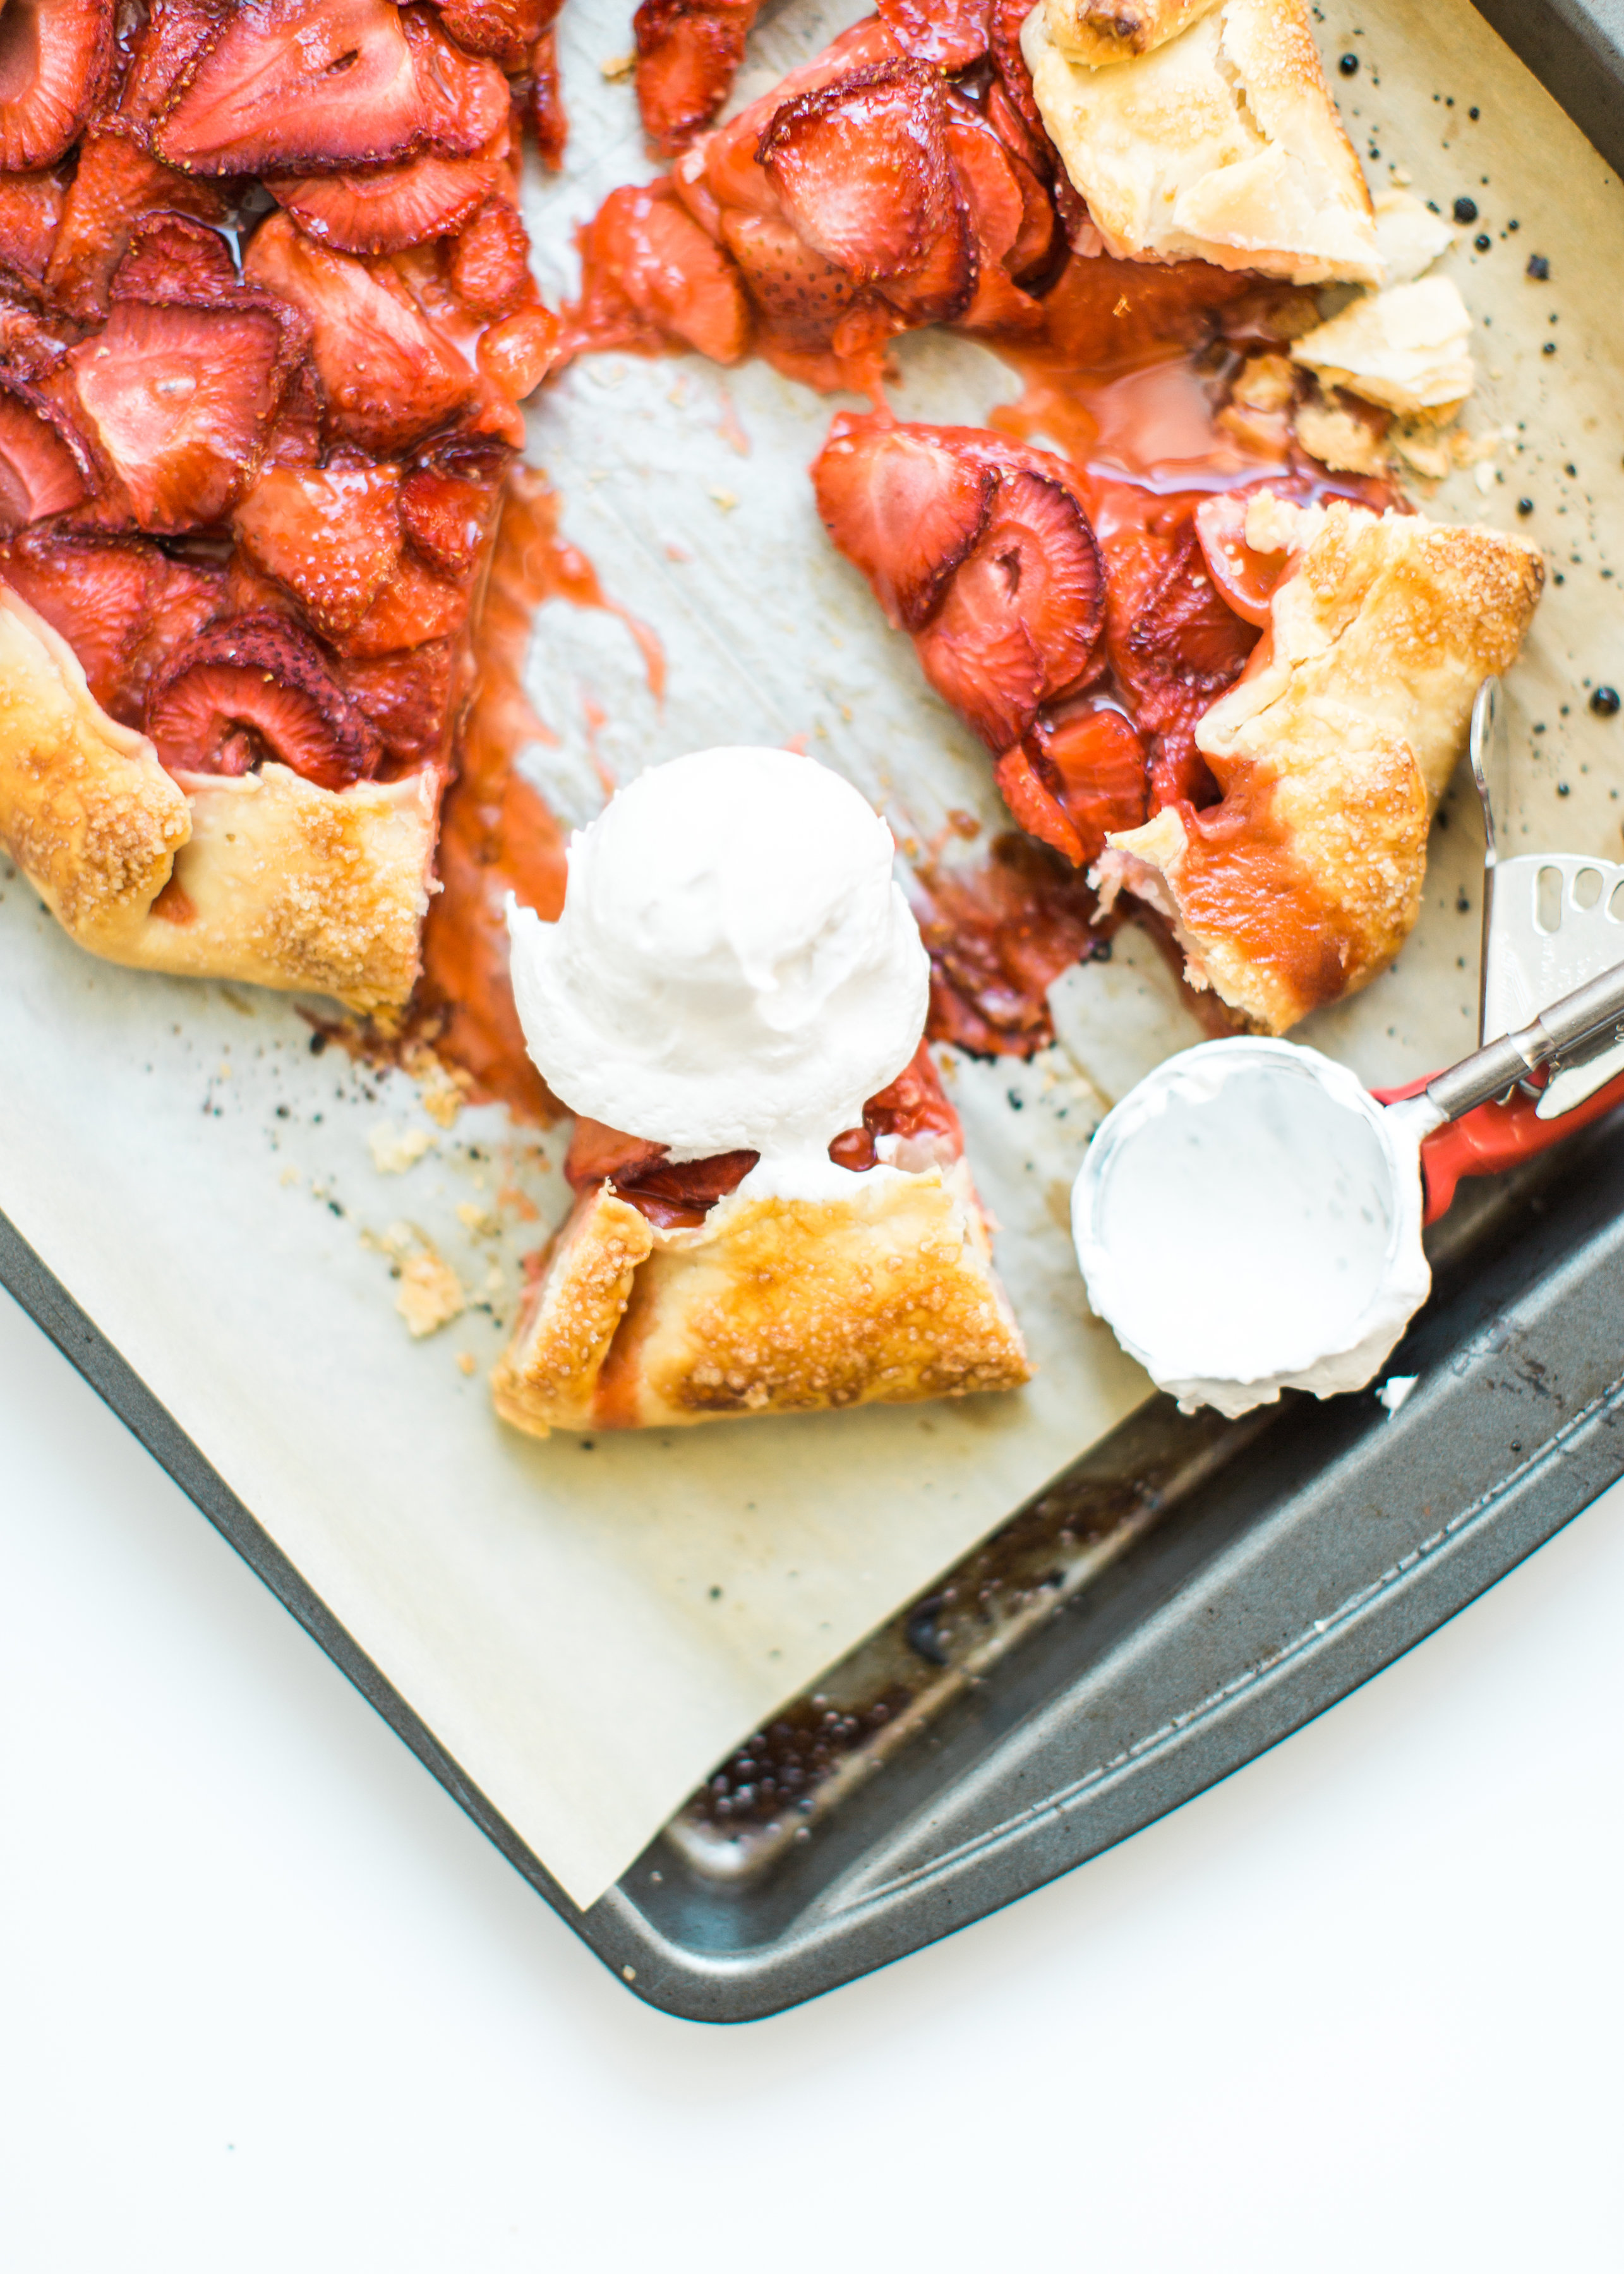 Flaky pie dough, a sweet jam and fresh strawberry filling, and a sprinkling of turbinado sugar on the crust, makes this simple strawberry galette or crostata, a.k.a., pie made easy using store-bought crust, the stuff of dreams. Click through for the recipe. #pie #strawberrypie #strawberrygalette #strawberrycrostata #crostata #galette #simplesummerdessert #summerdessert #springdessert #simpledessert #easydessert #easypie #simplepie | glitterinc.com | @glitterinc